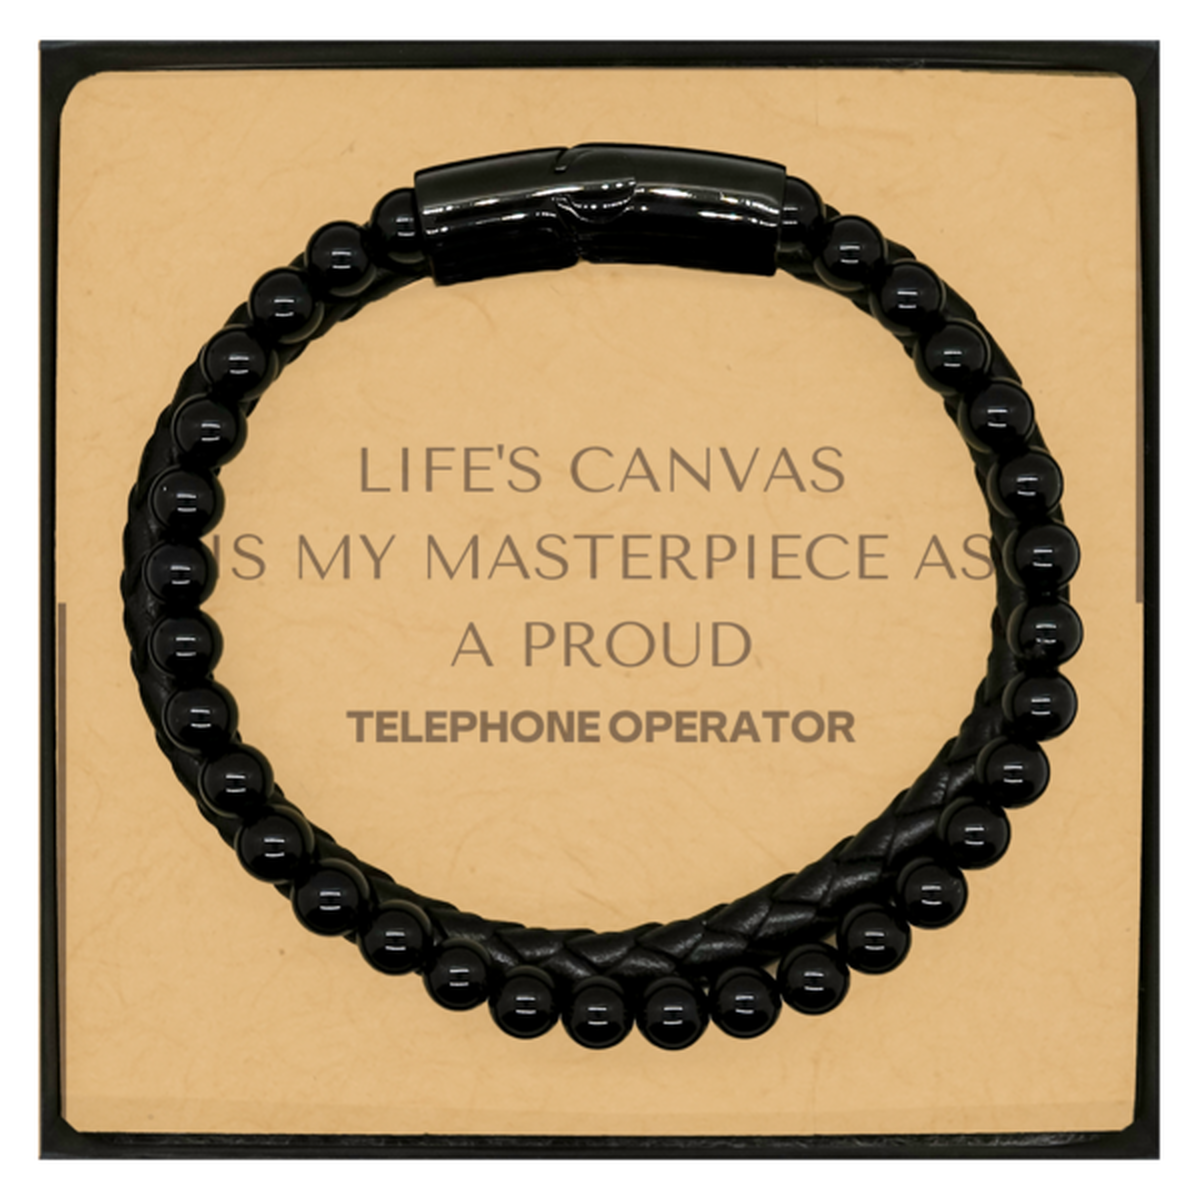 Proud Telephone Operator Gifts, Life's canvas is my masterpiece, Epic Birthday Christmas Unique Stone Leather Bracelets For Telephone Operator, Coworkers, Men, Women, Friends